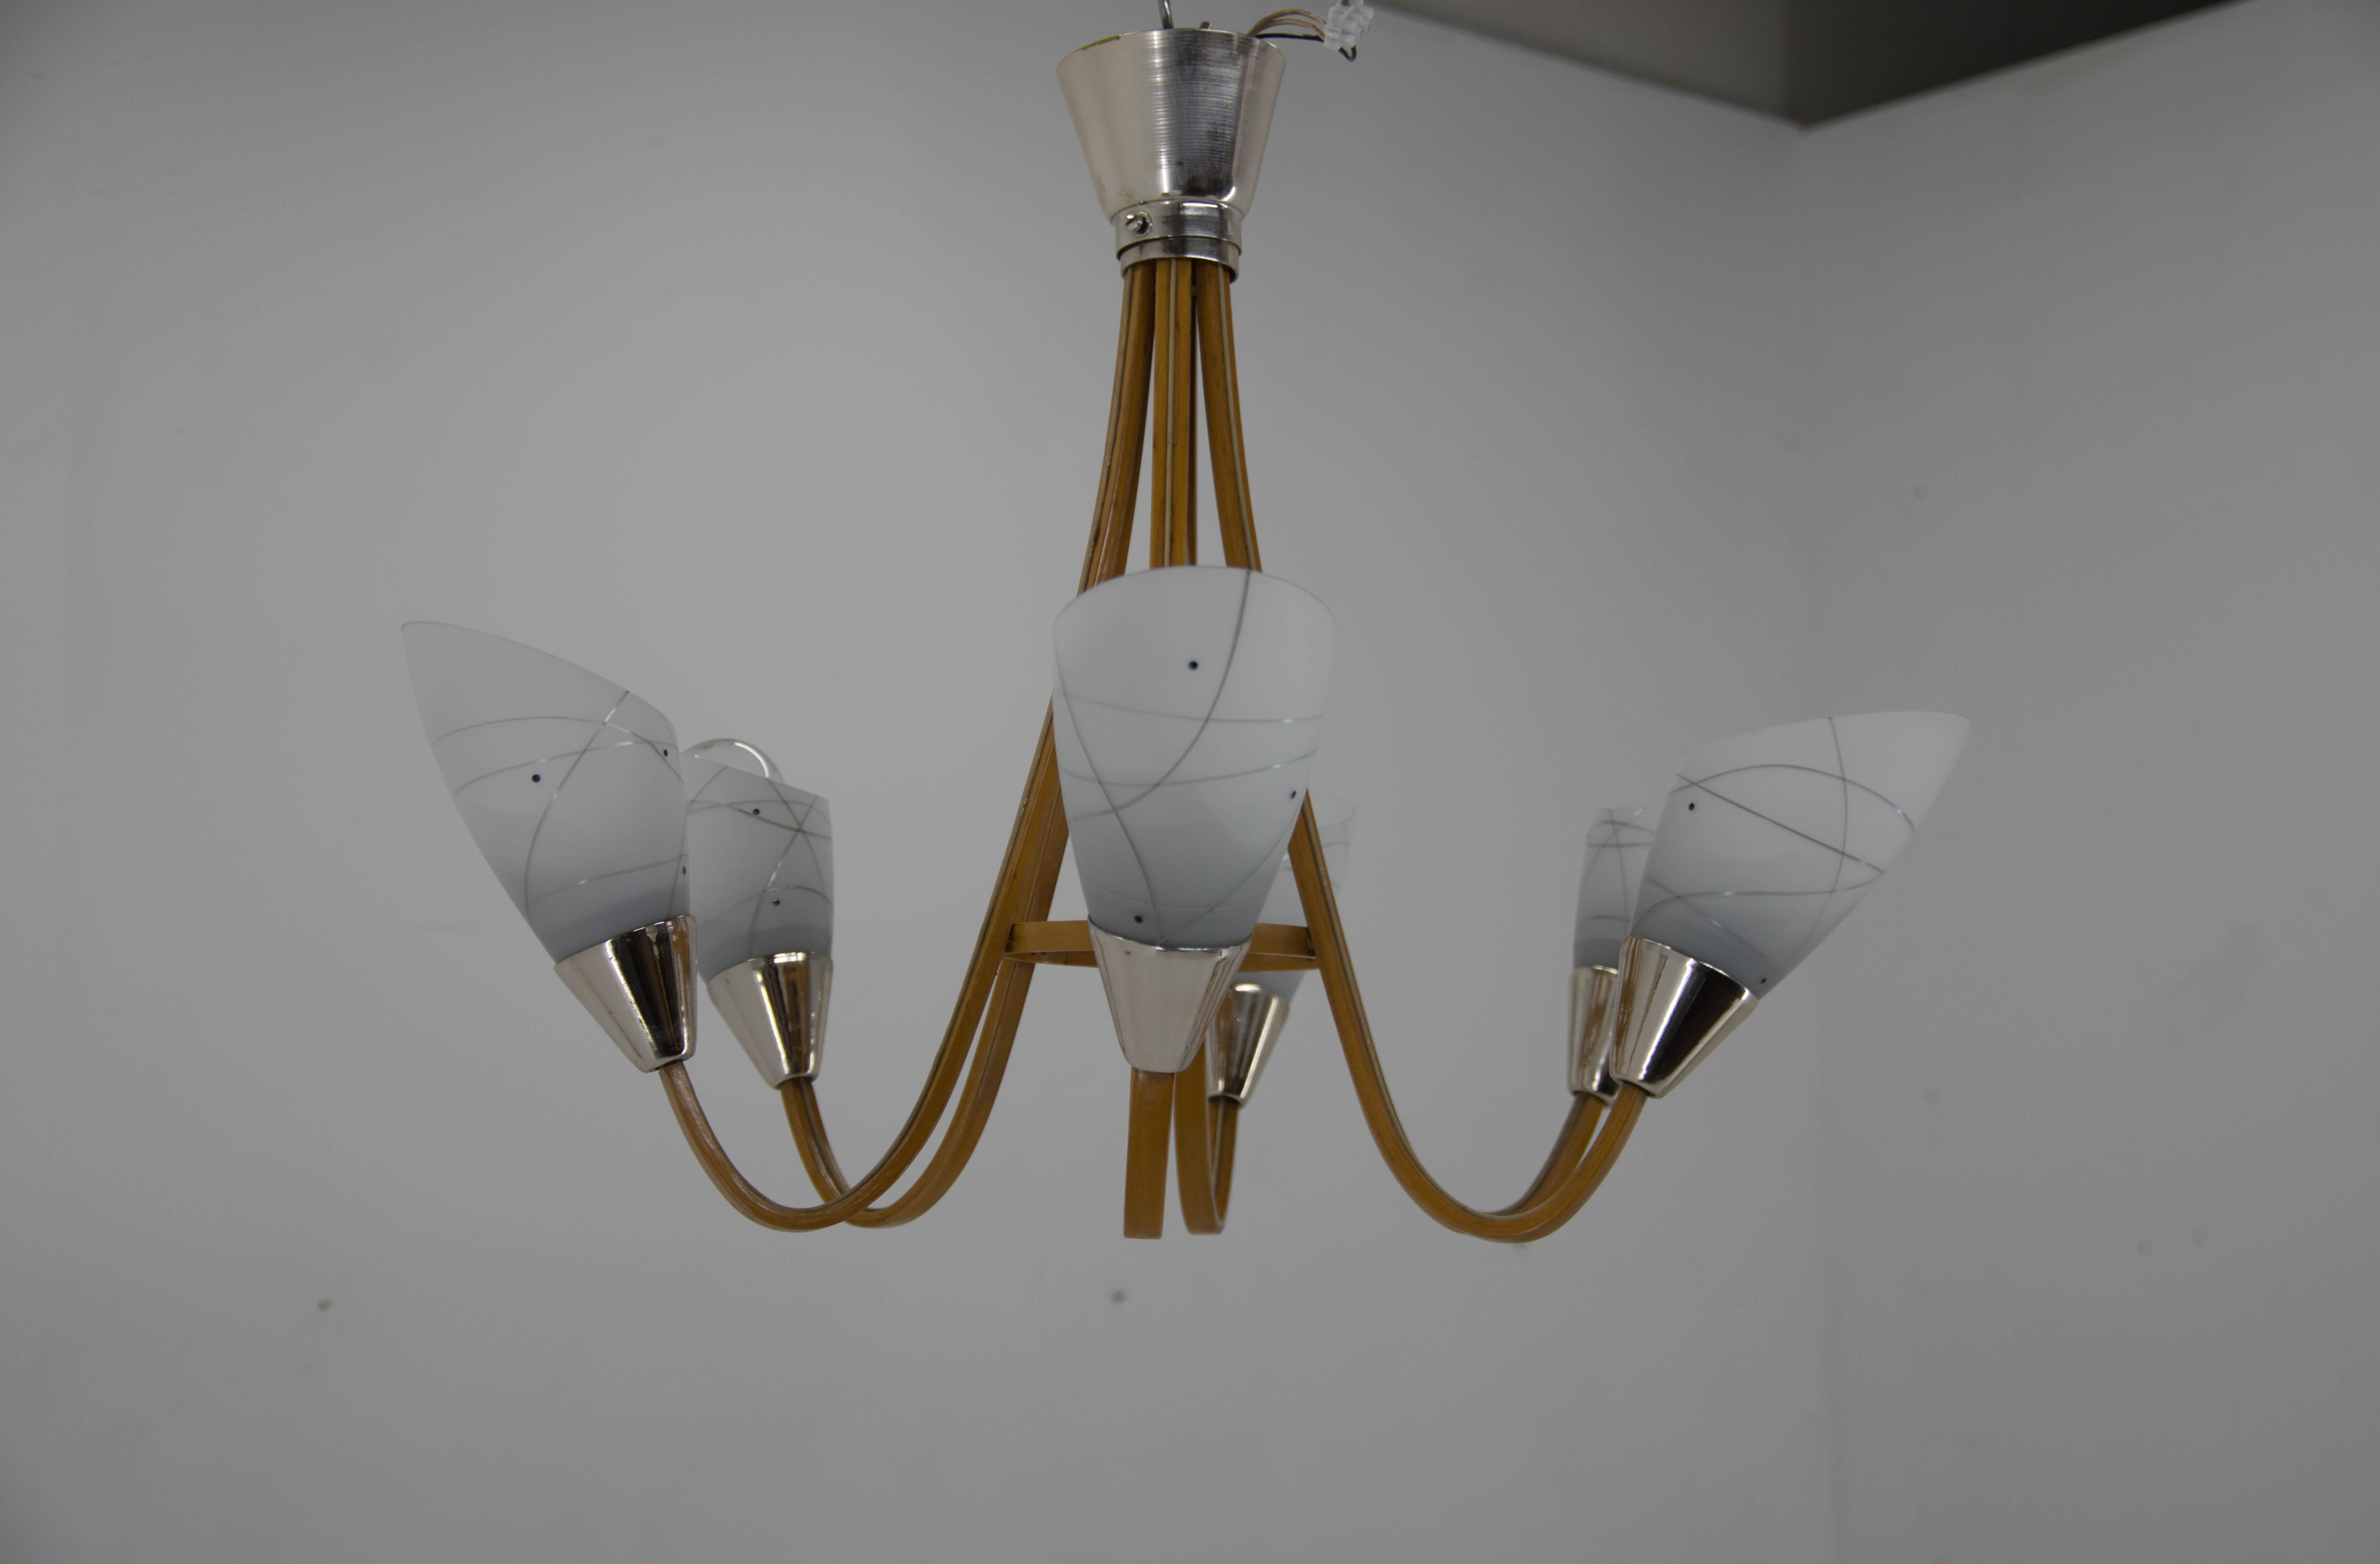 20th Century Midcentury Wood & Glass Chandelier by Dřevo Humpolec, 1960s For Sale